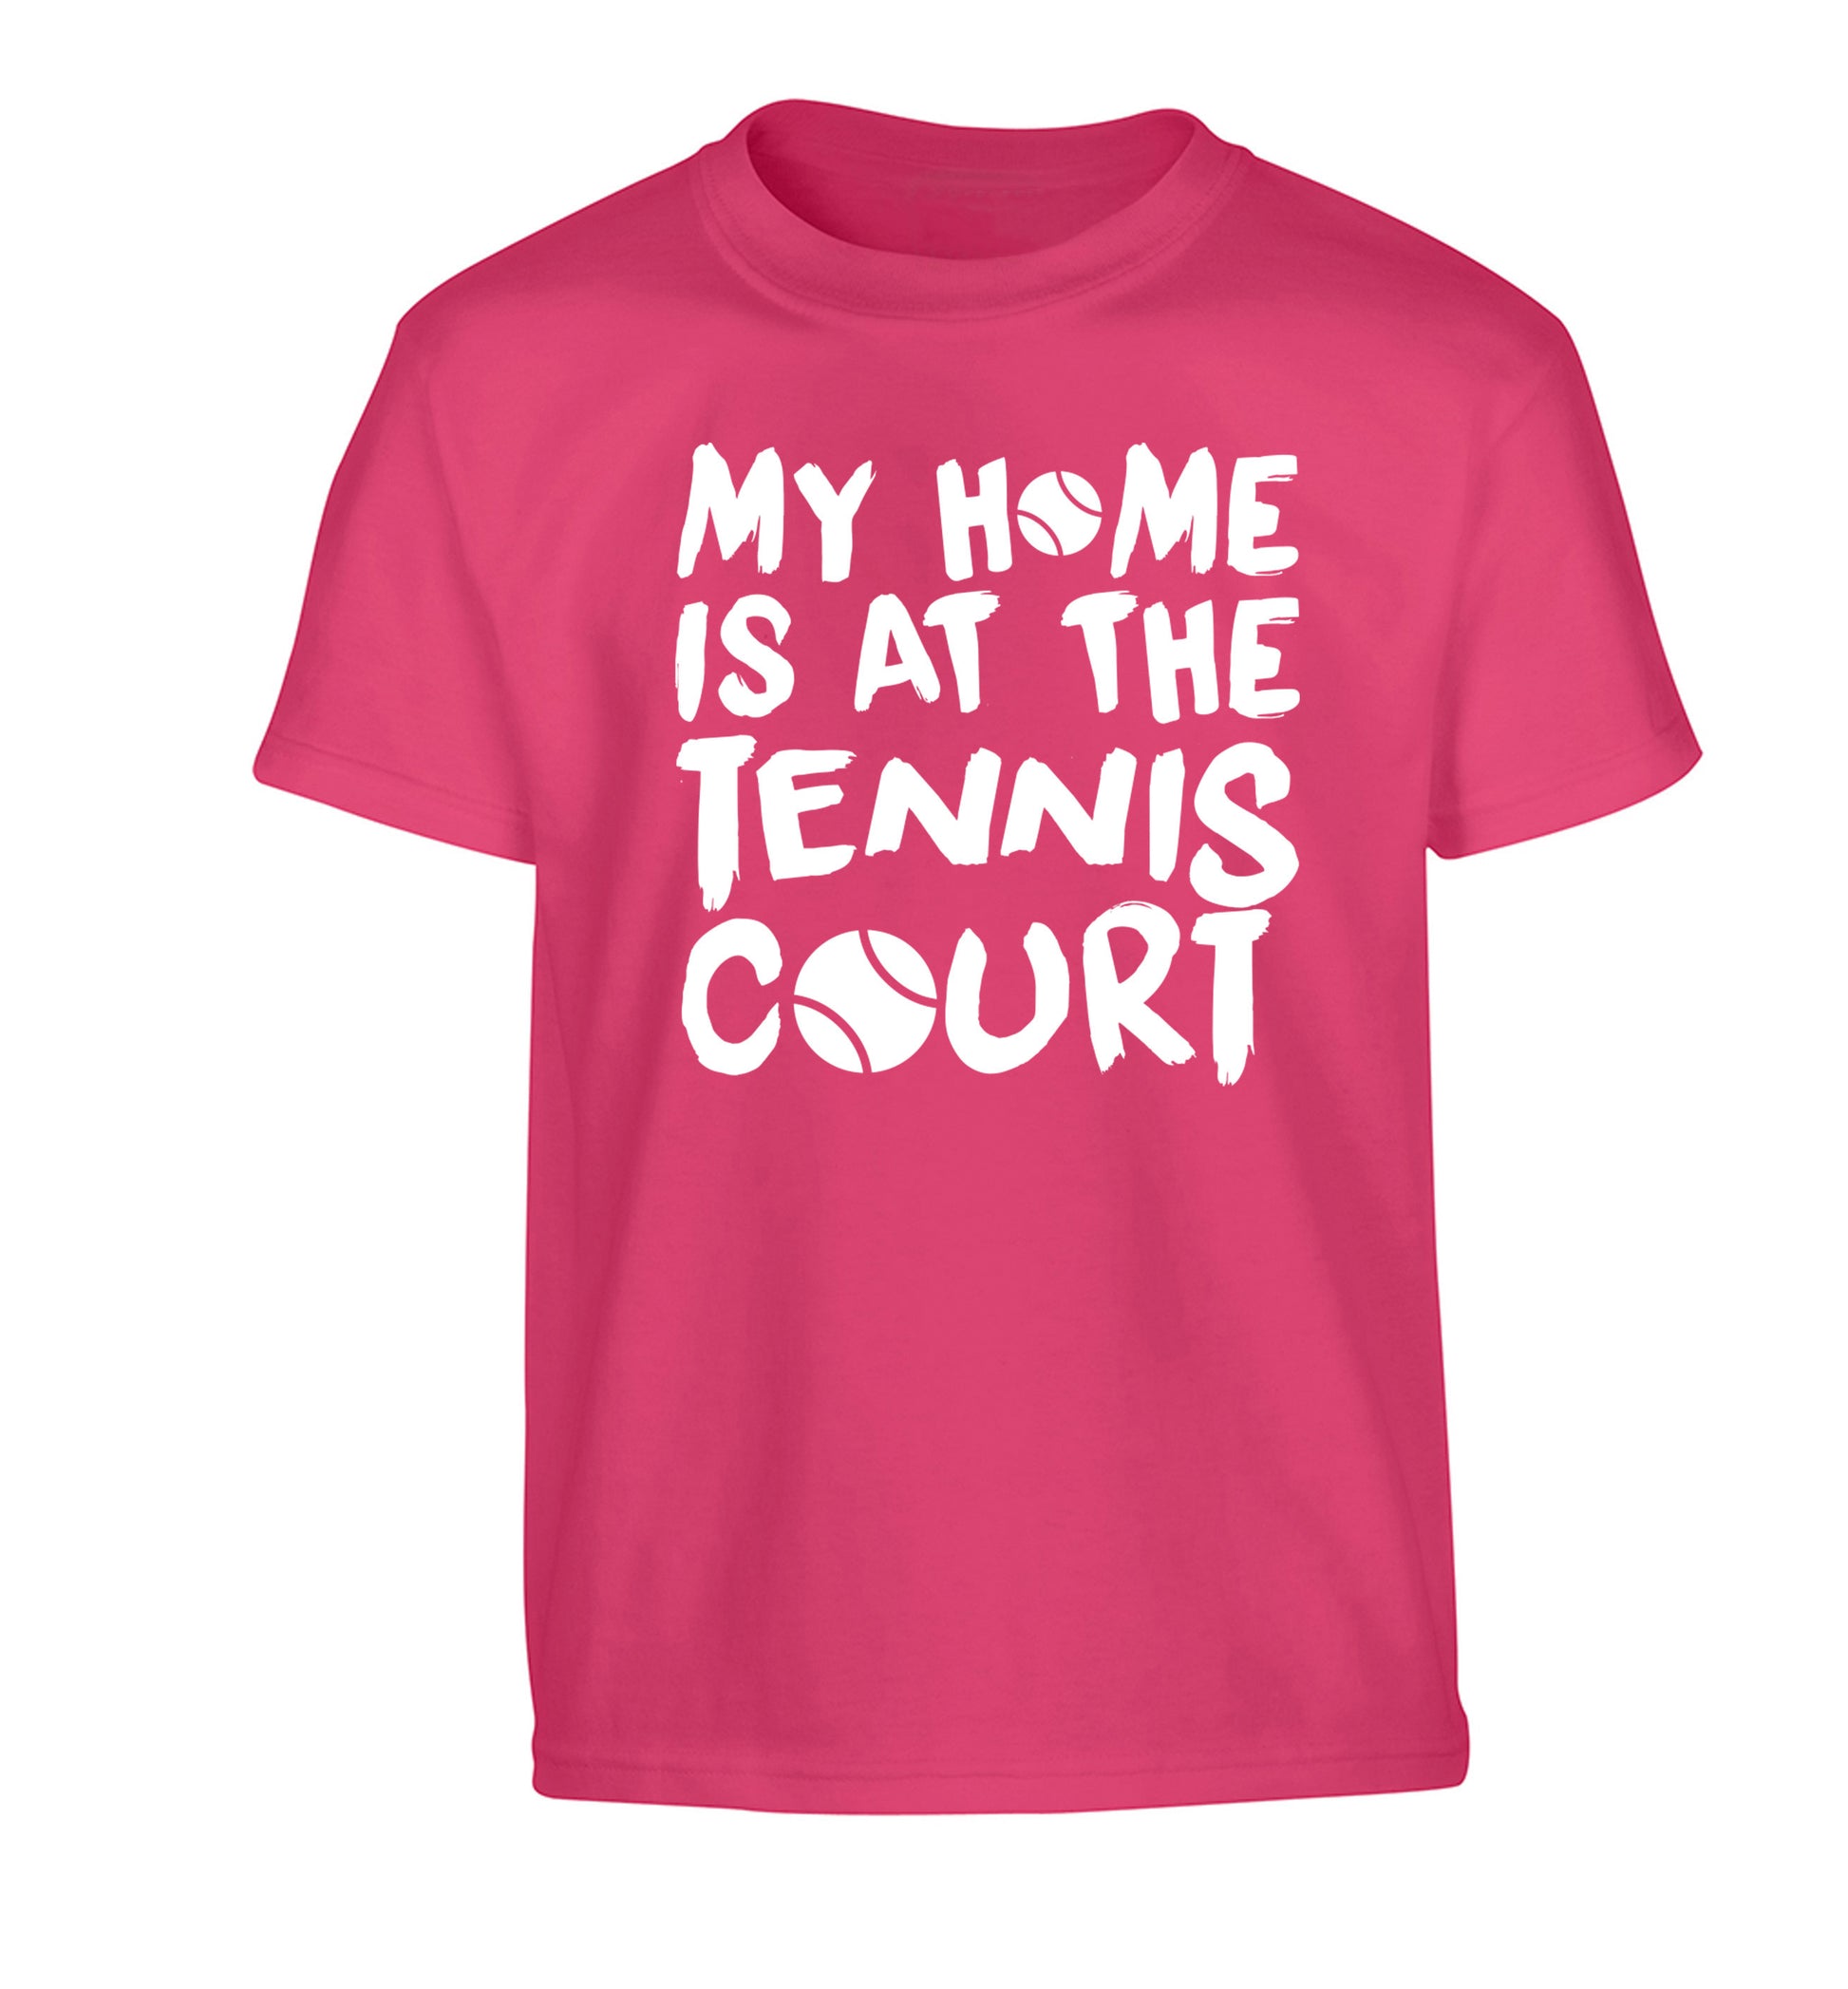 My home is at the tennis court Children's pink Tshirt 12-14 Years